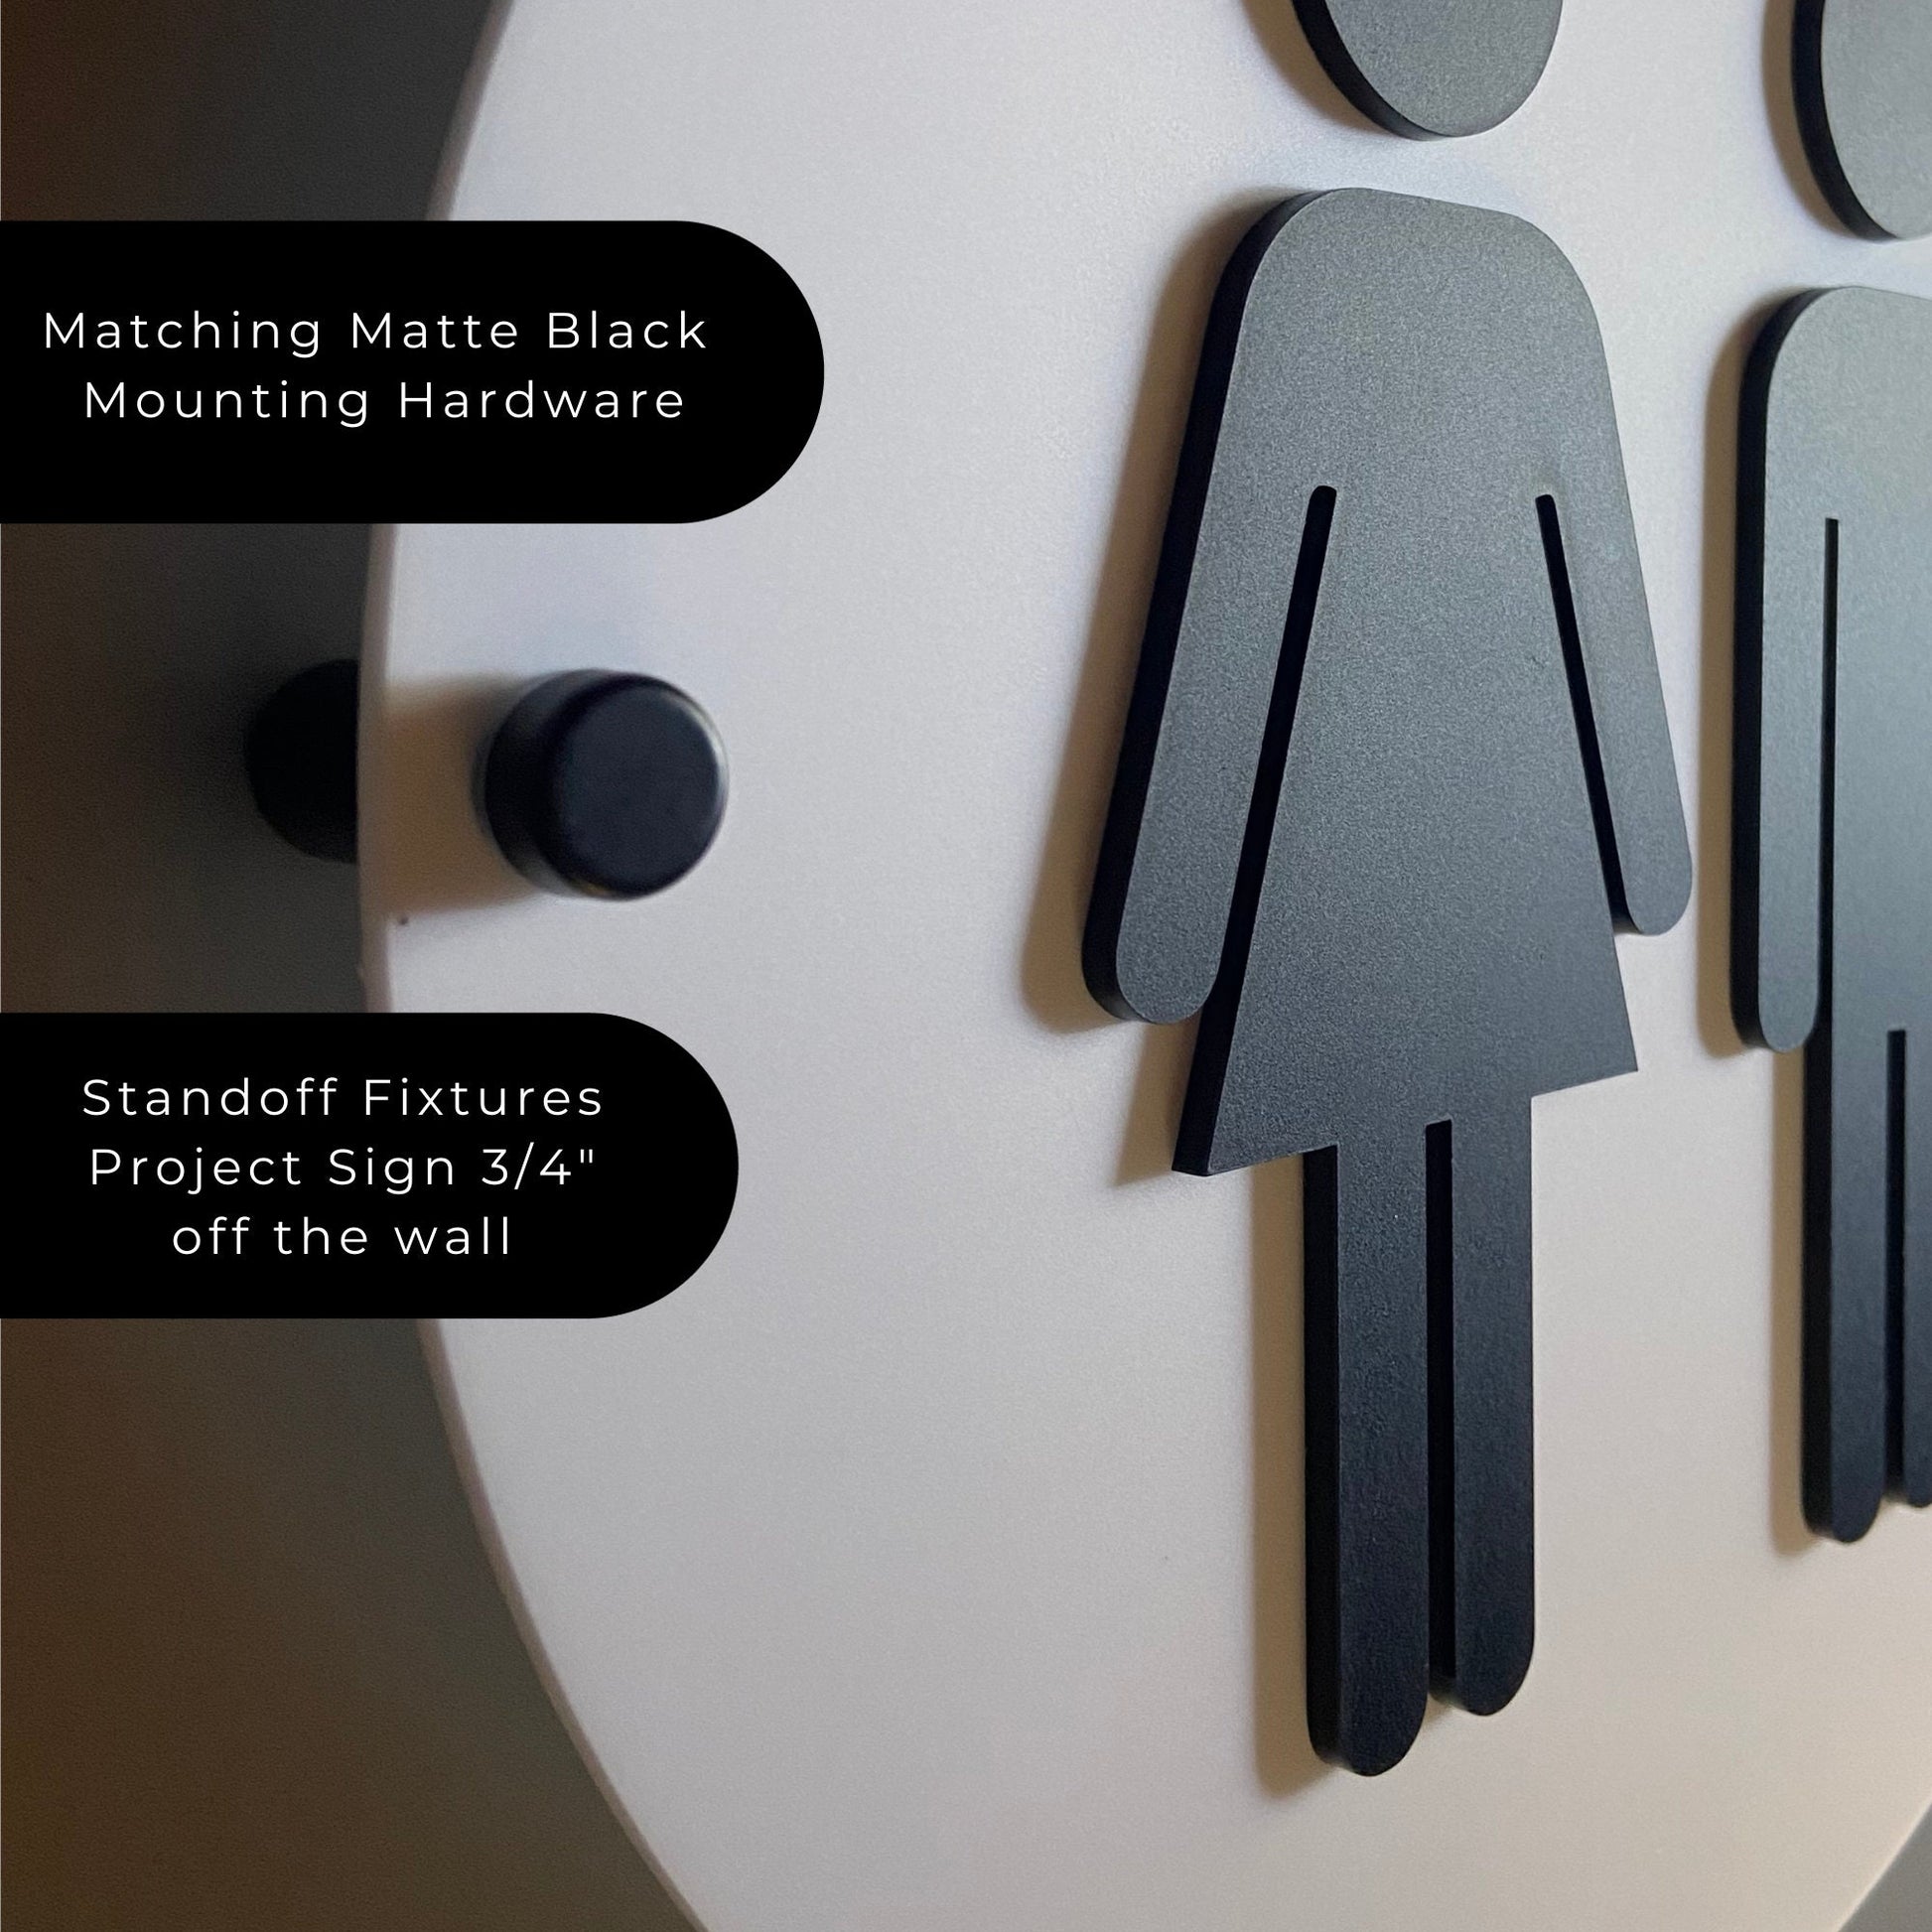 Matte White and Black Acrylic Restroom Signs Office Cafe Business Men Women Handicap Bathroom 9x9" or 12x12" | Priced per sign not as a set